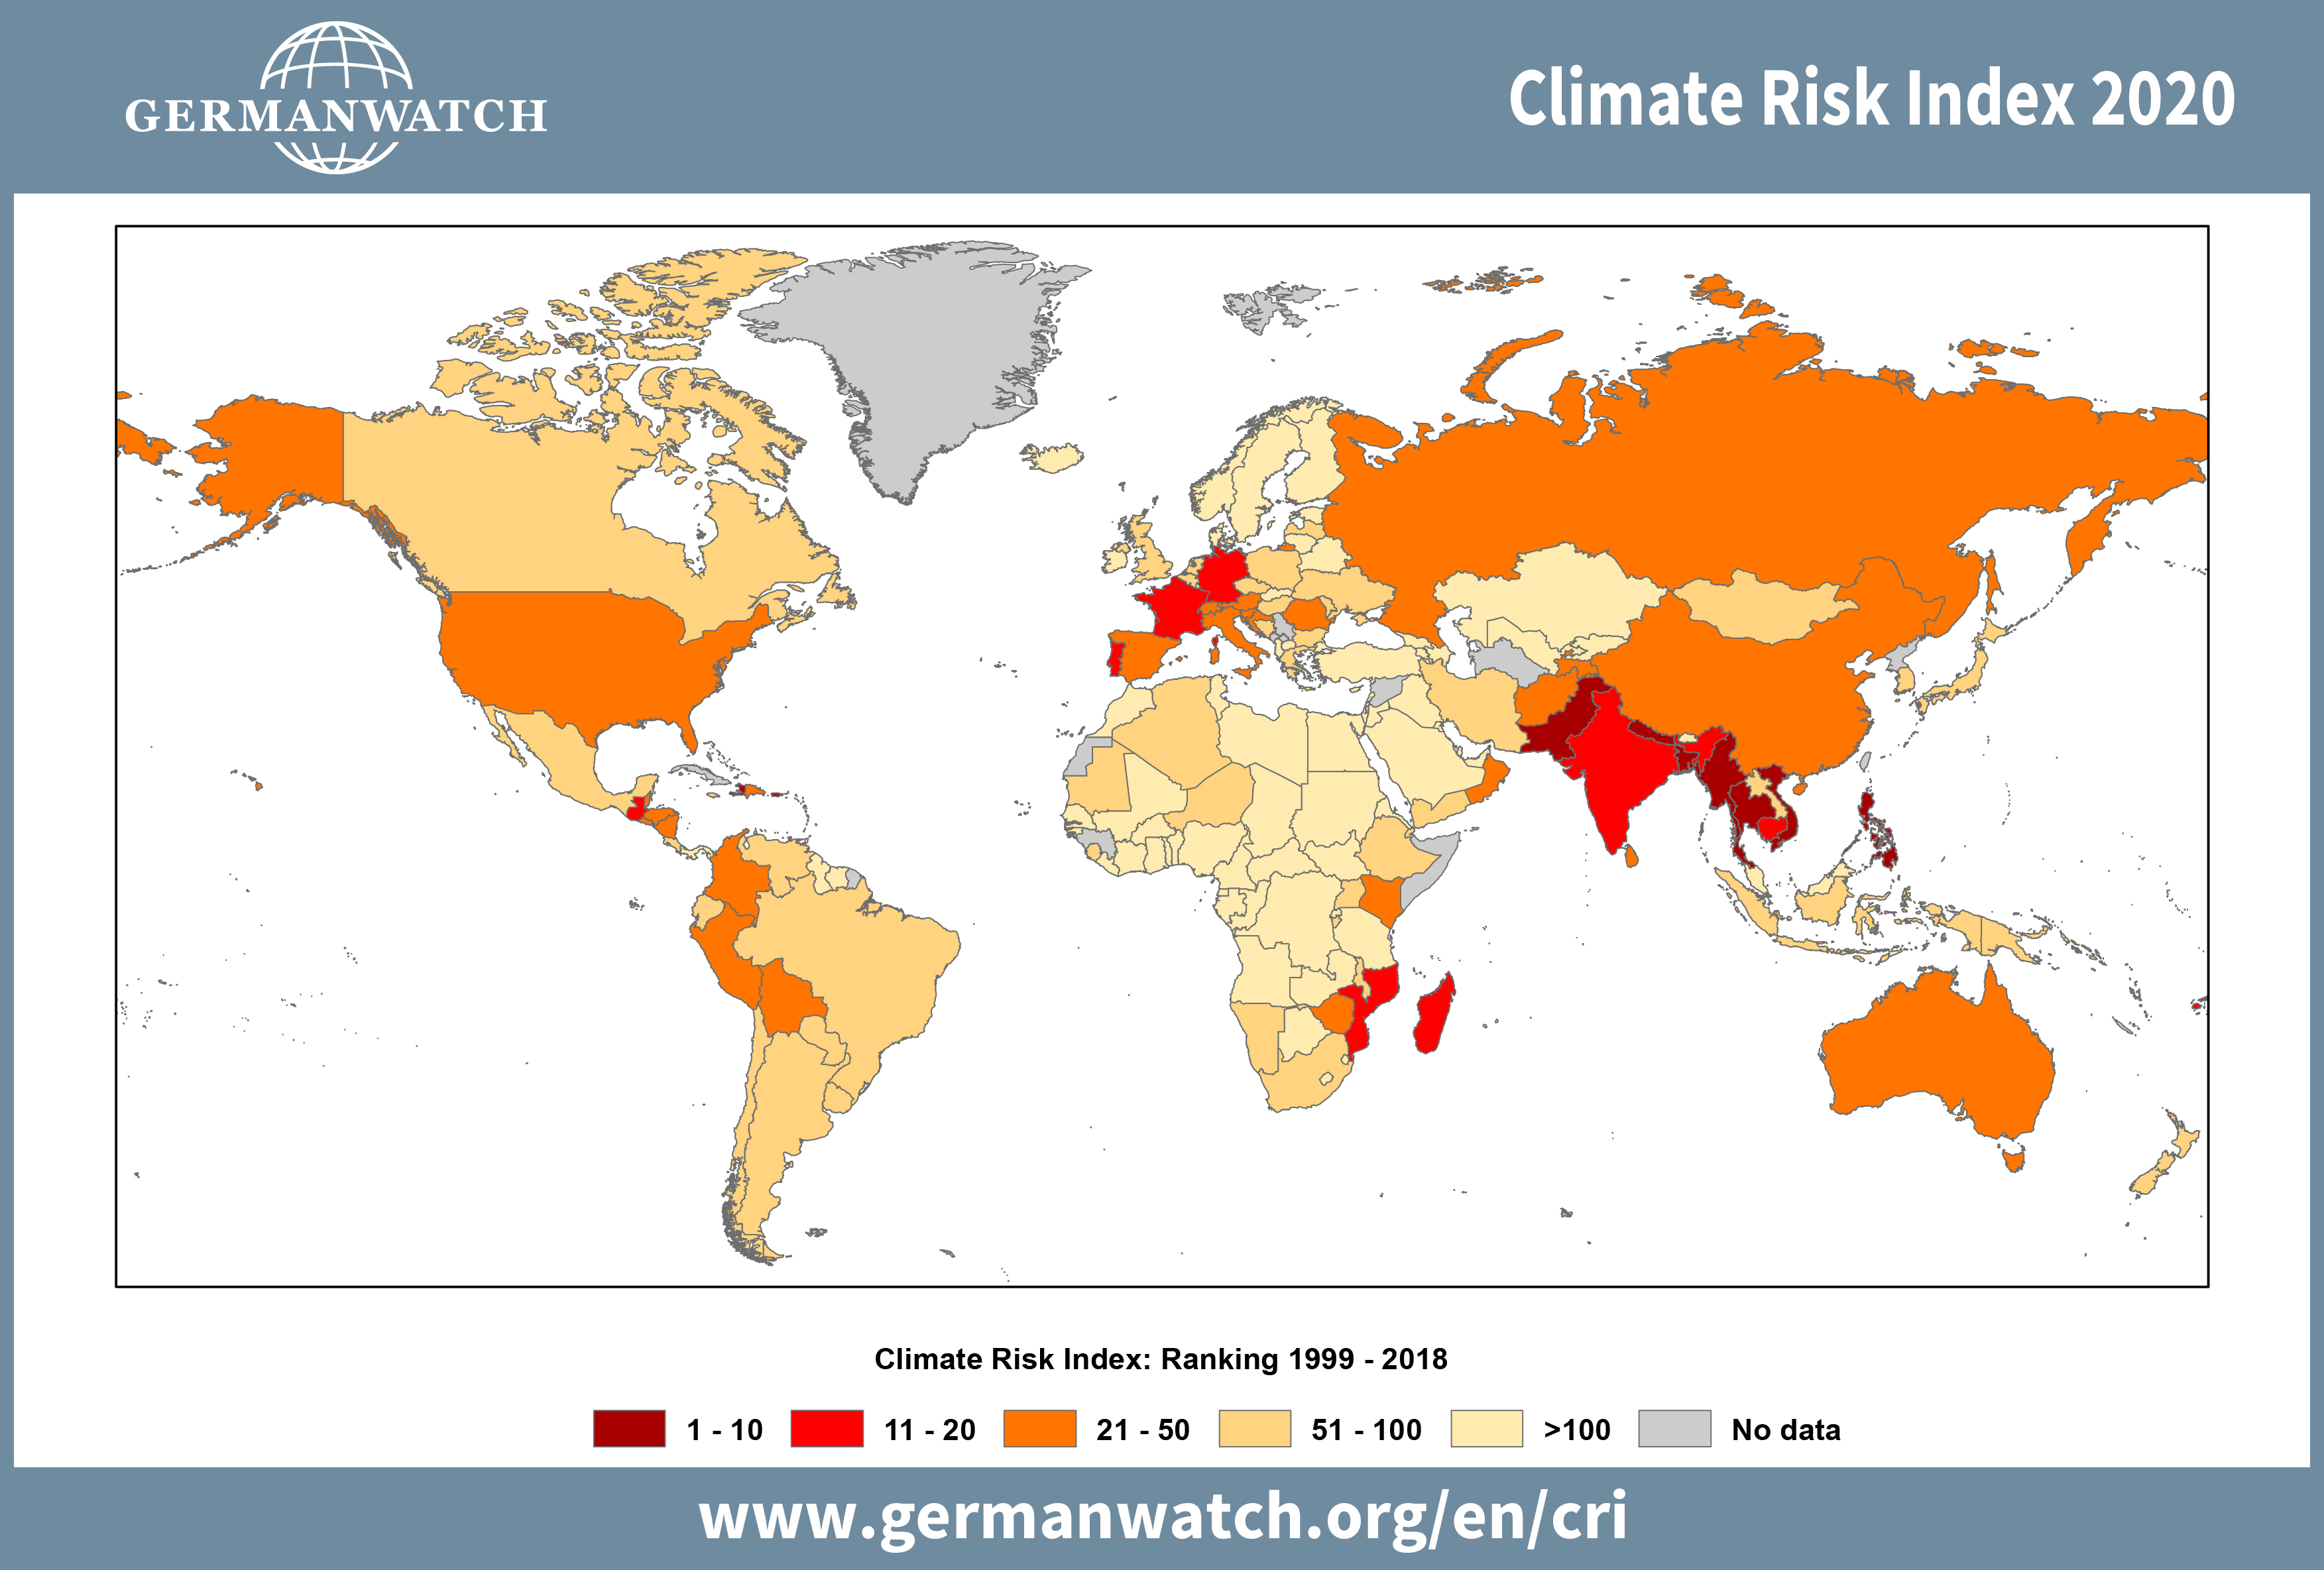 World map of the climate risk index.